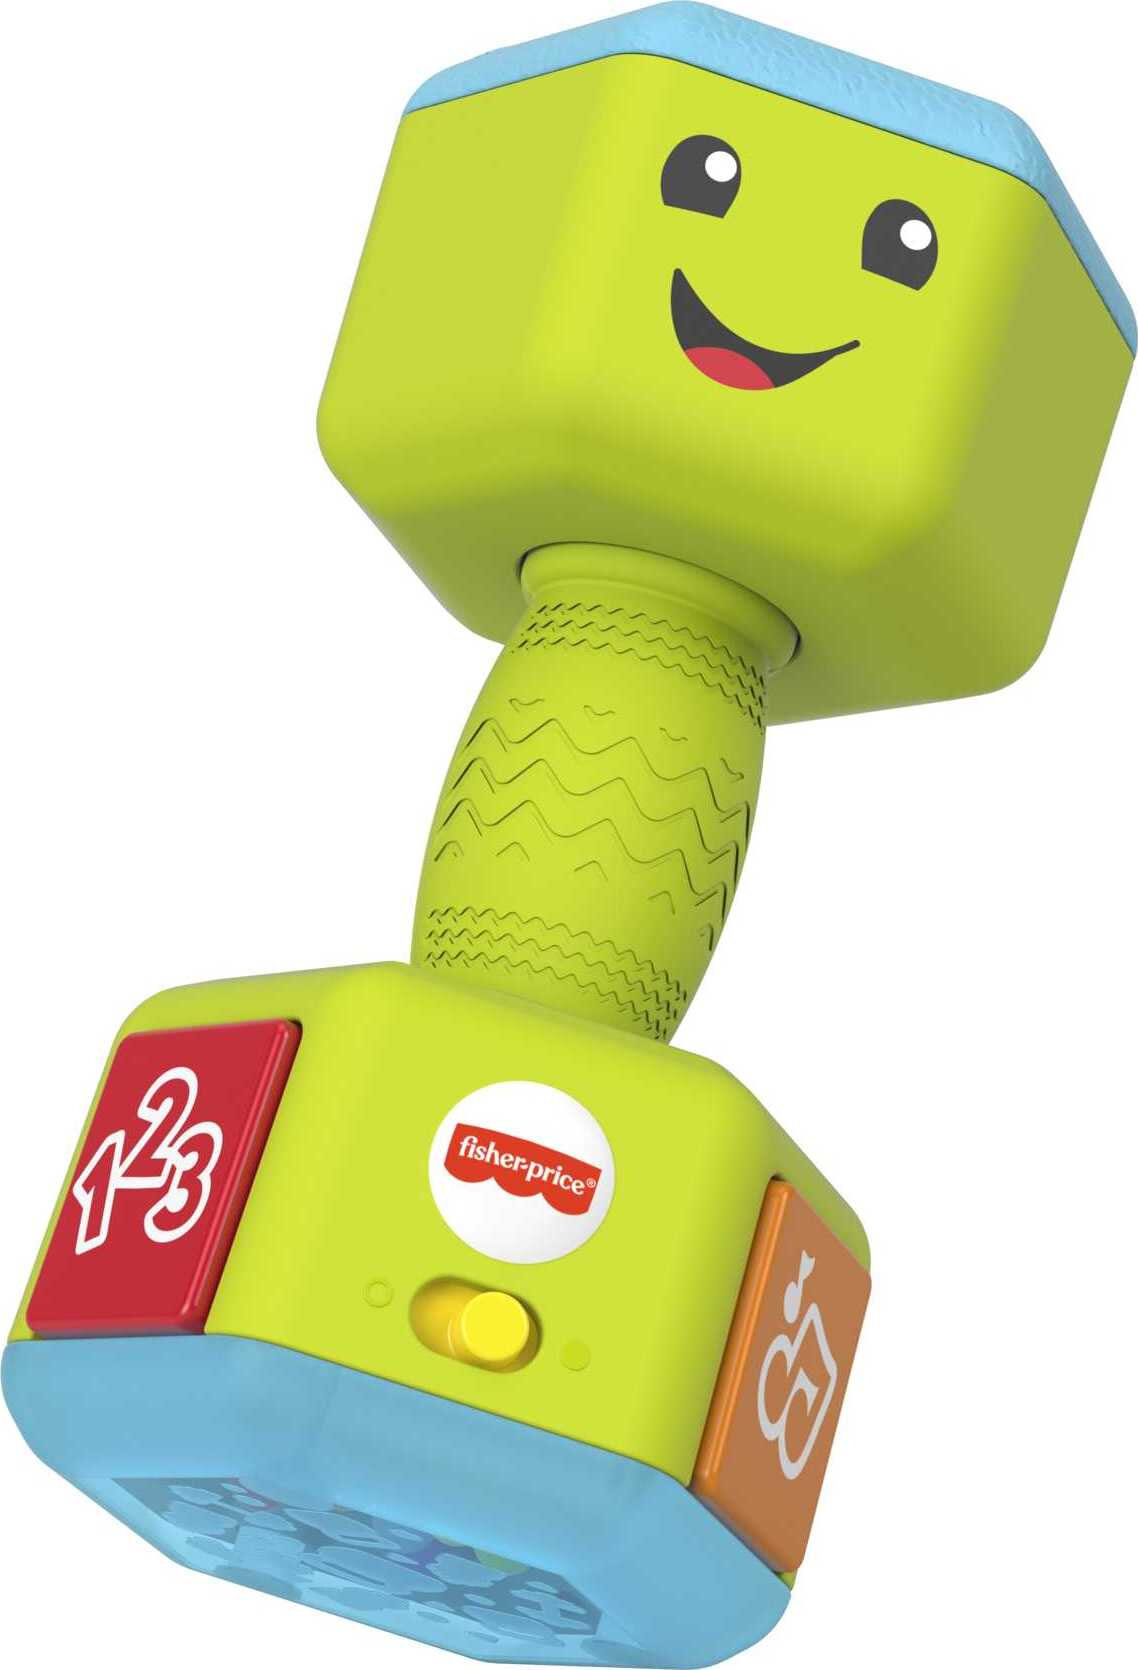 Fisher-Price Laugh & Learn Countin’ Reps Dumbbell Musical Rattle Toy for Infant & Toddler - image 1 of 6